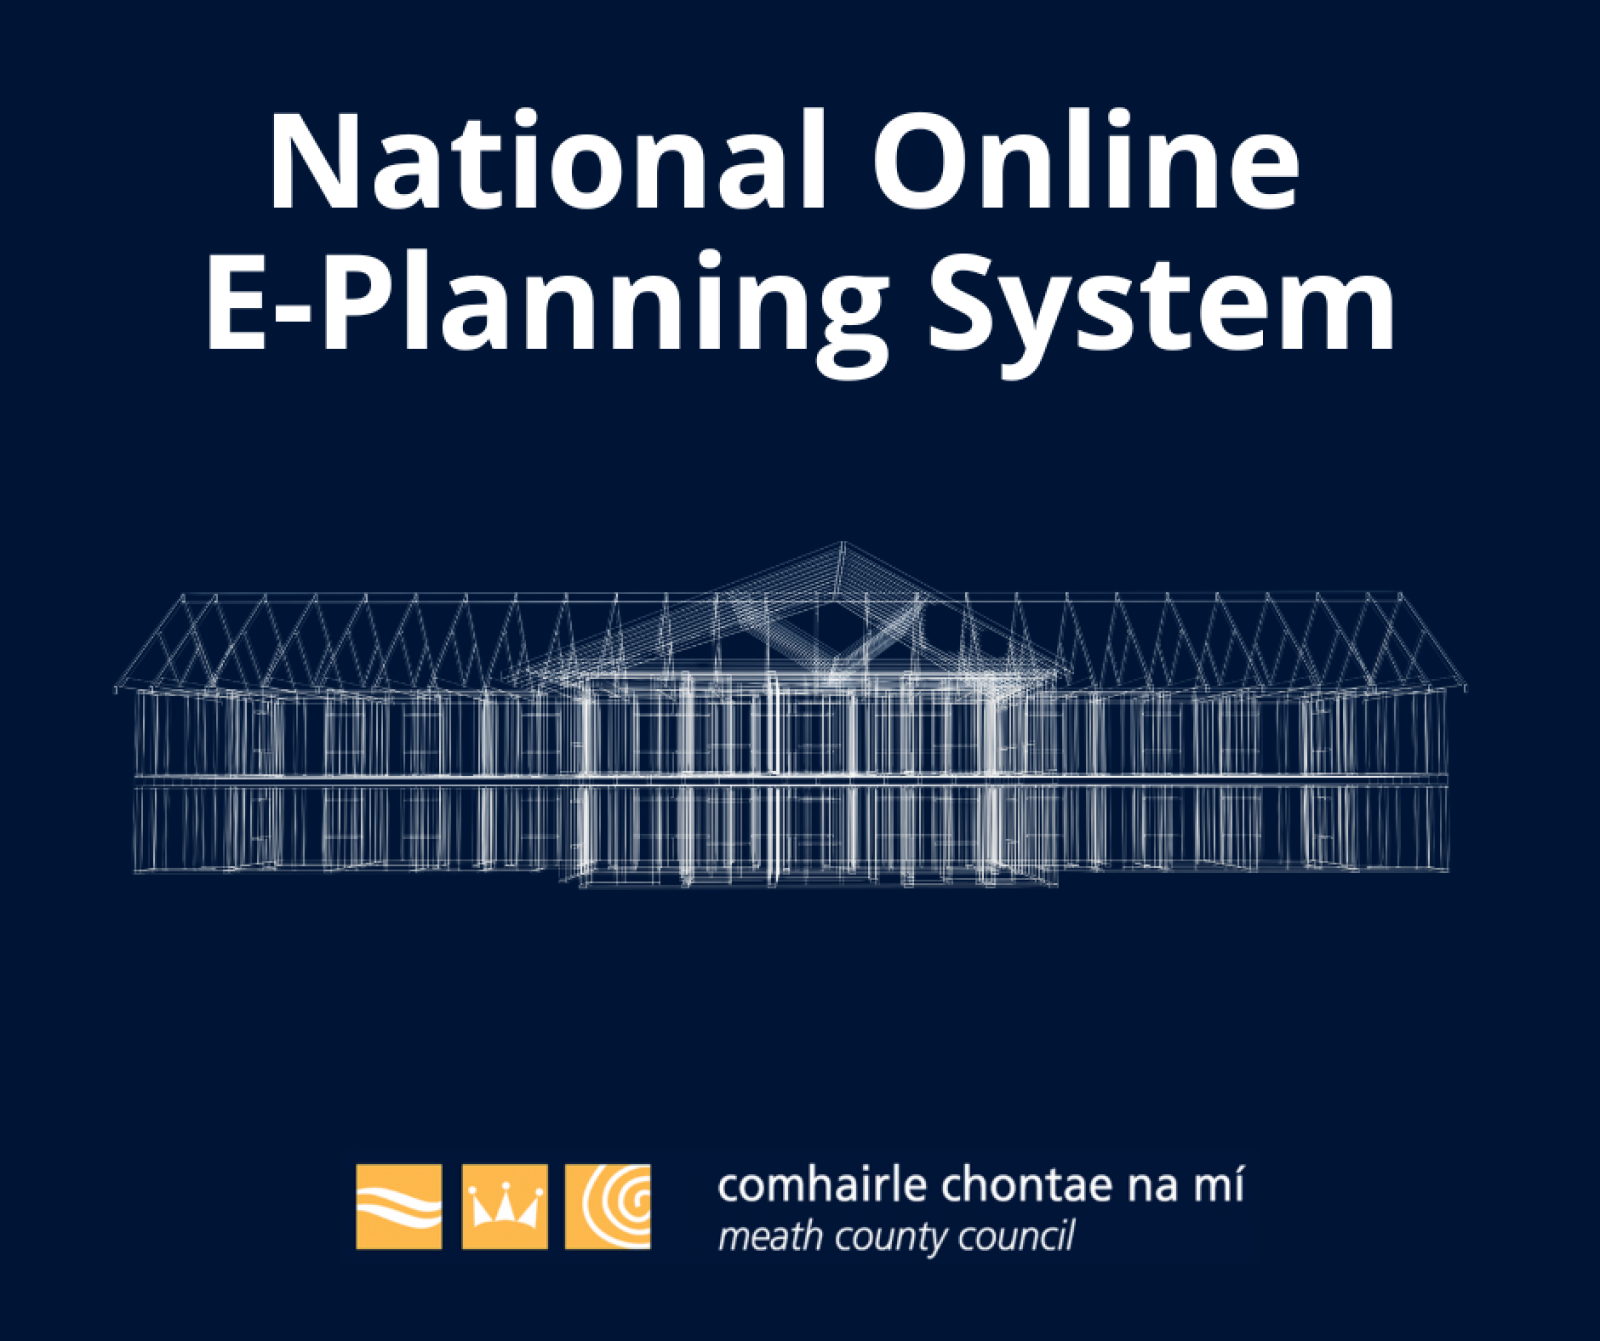 National Online E-Planning Systems